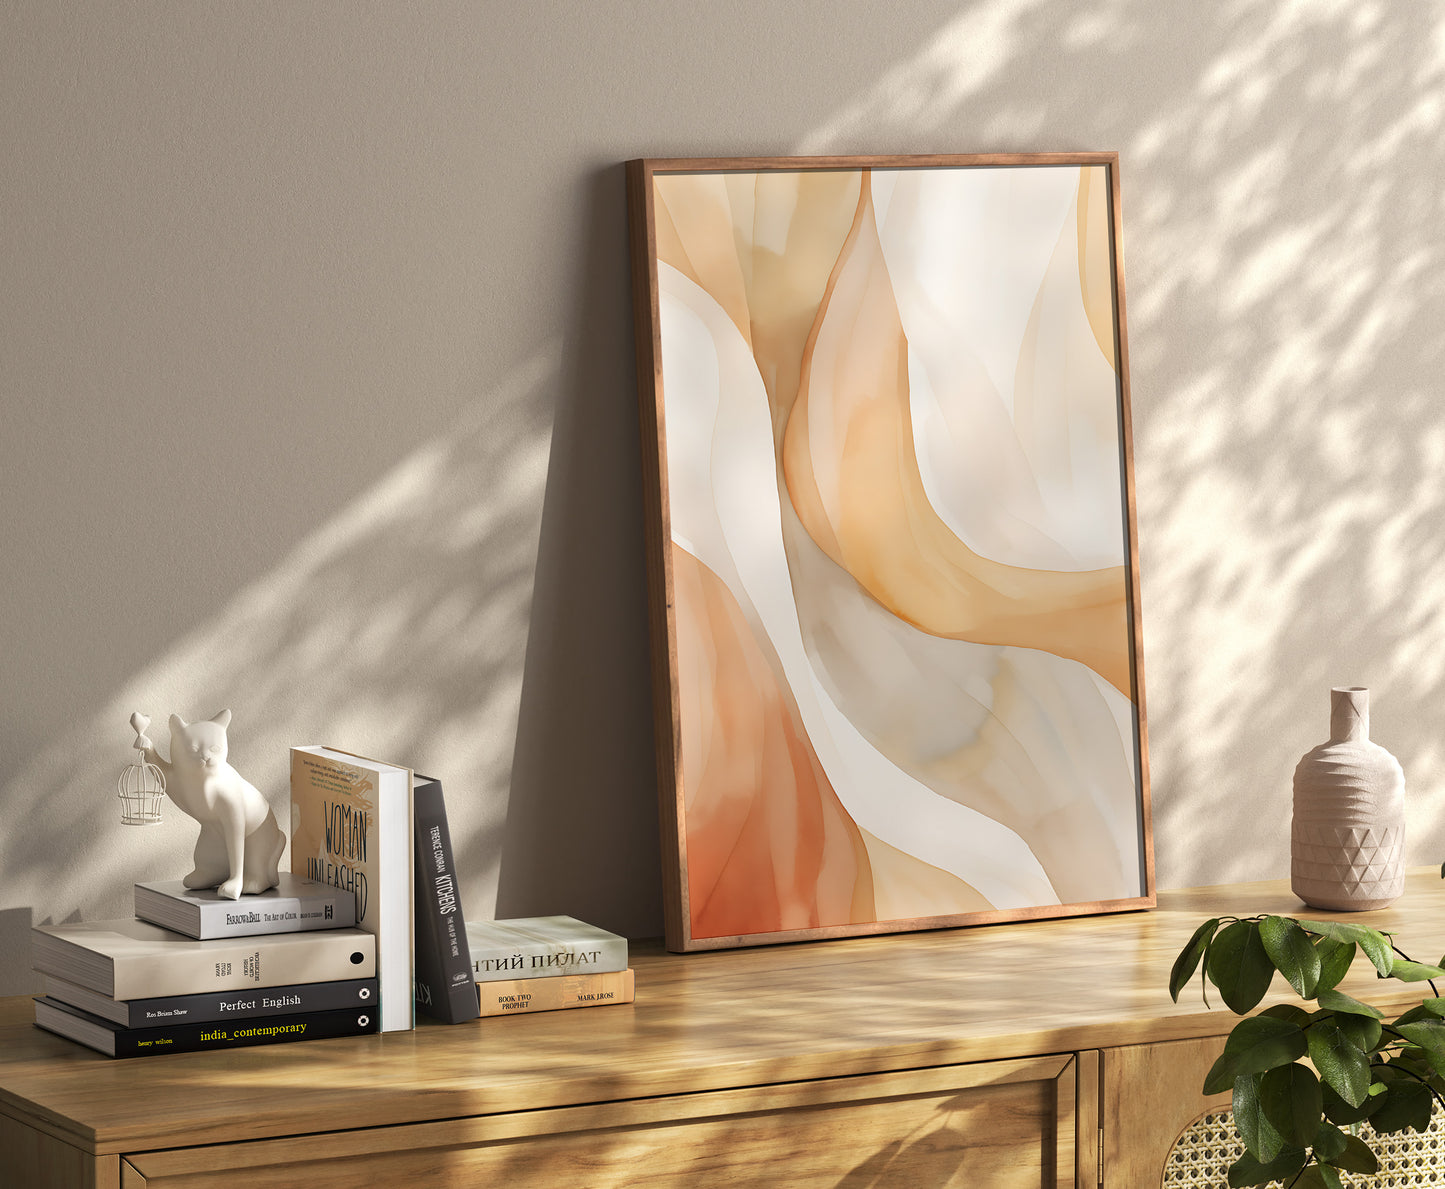 Modern abstract art in frame leaning against wall with books and decor on shelf.